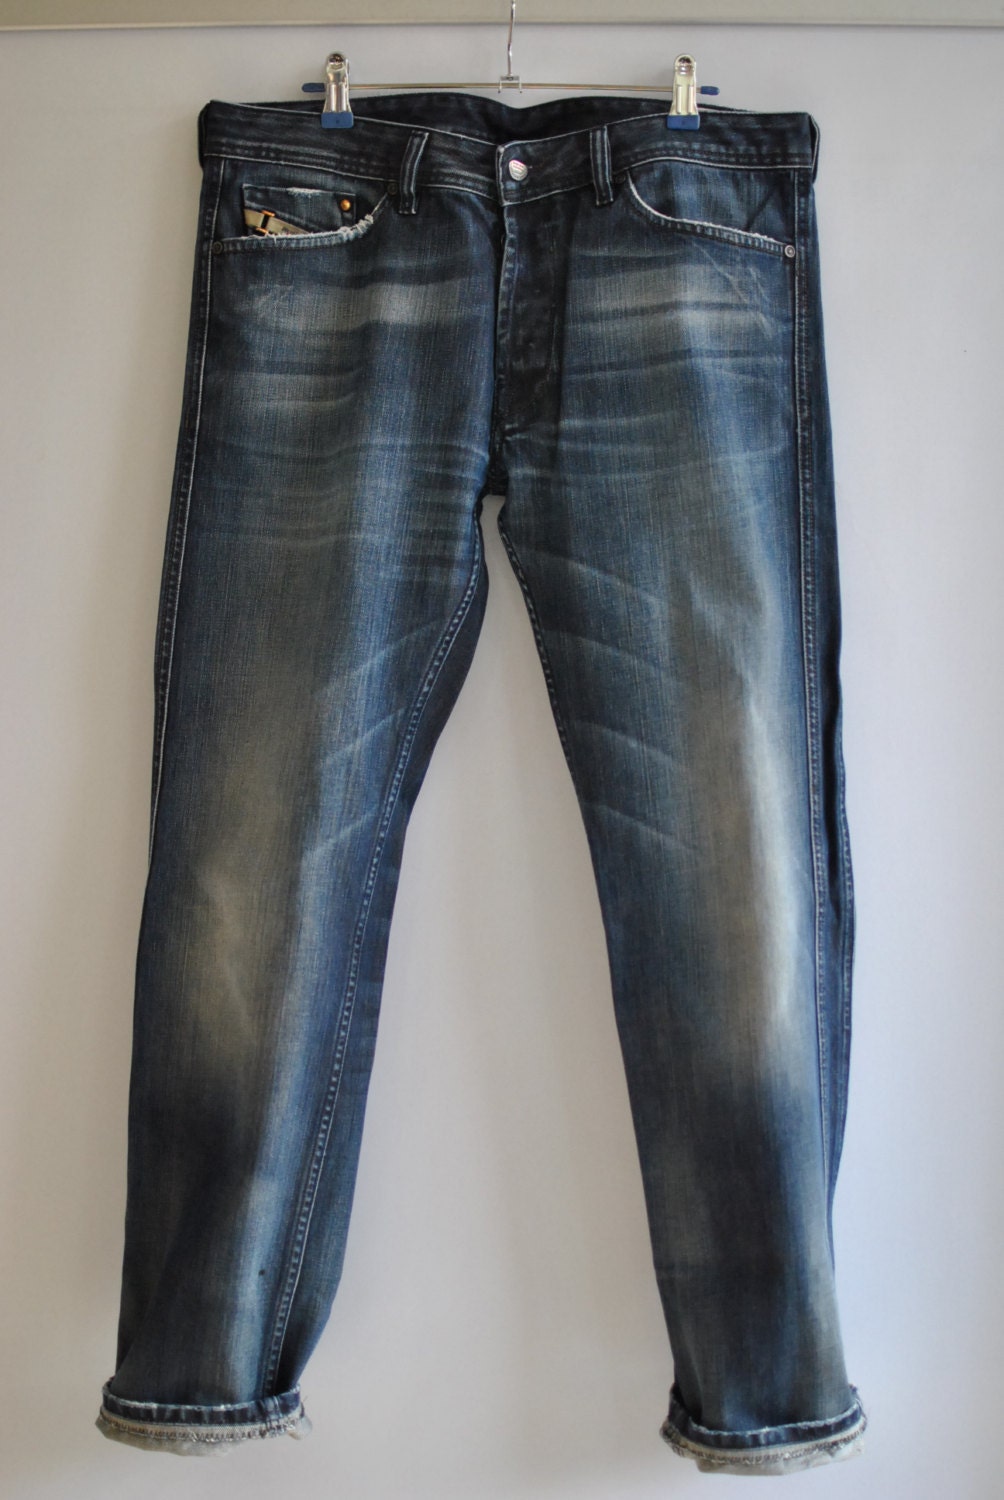 Vintage DIESEL mens jeans DUGHAN style with advance